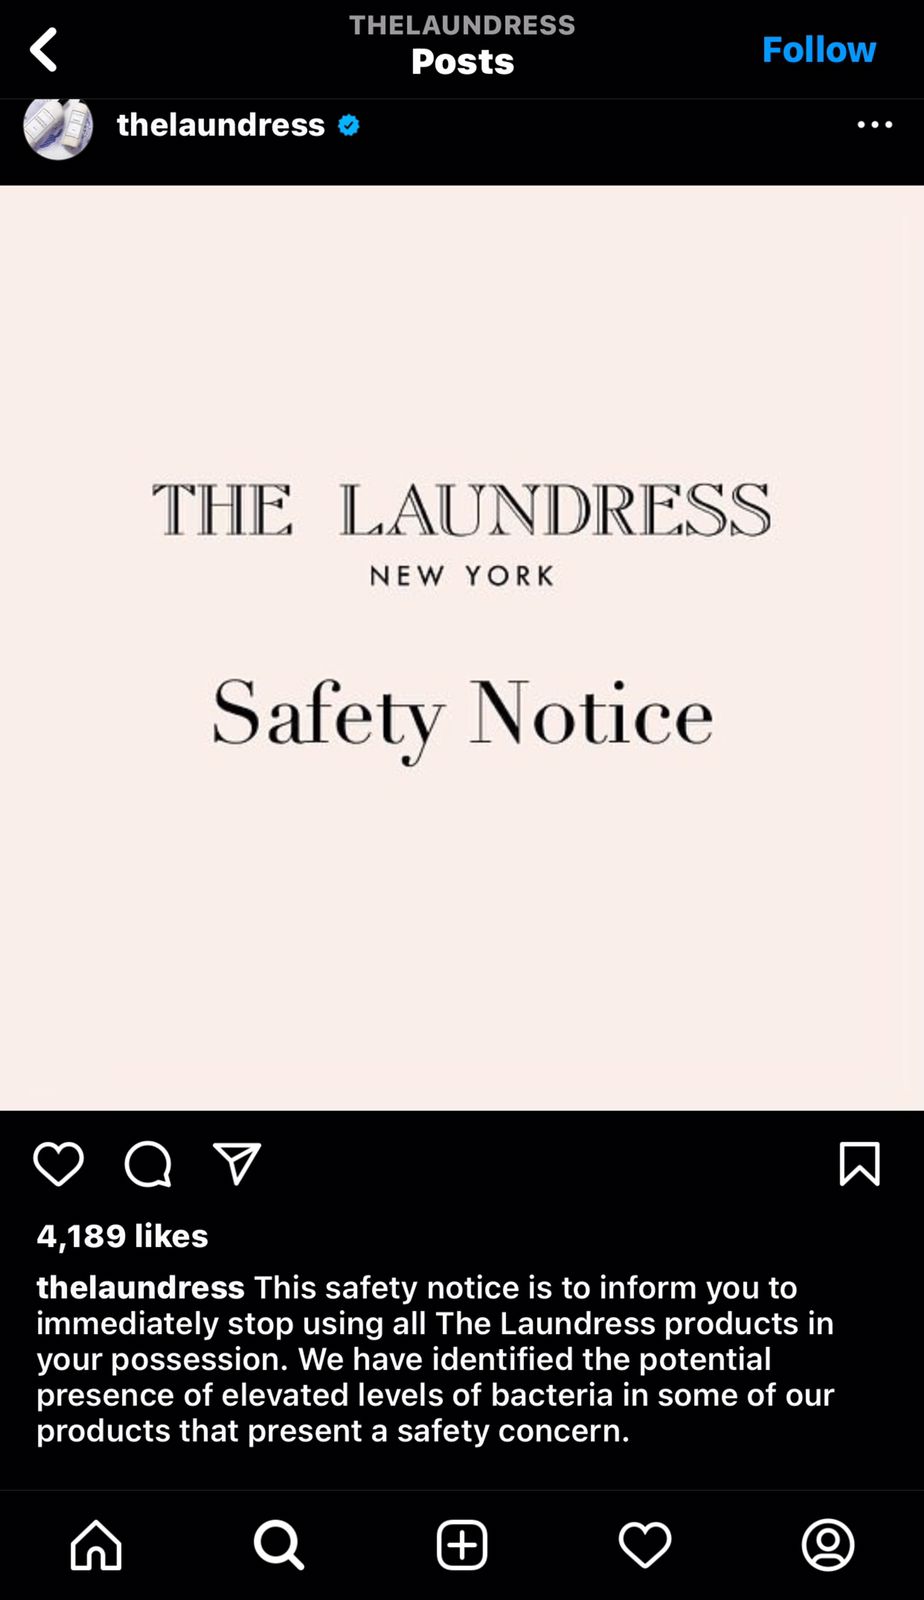 'The Laundress' Recalls All Its Products Due To Safety Concerns